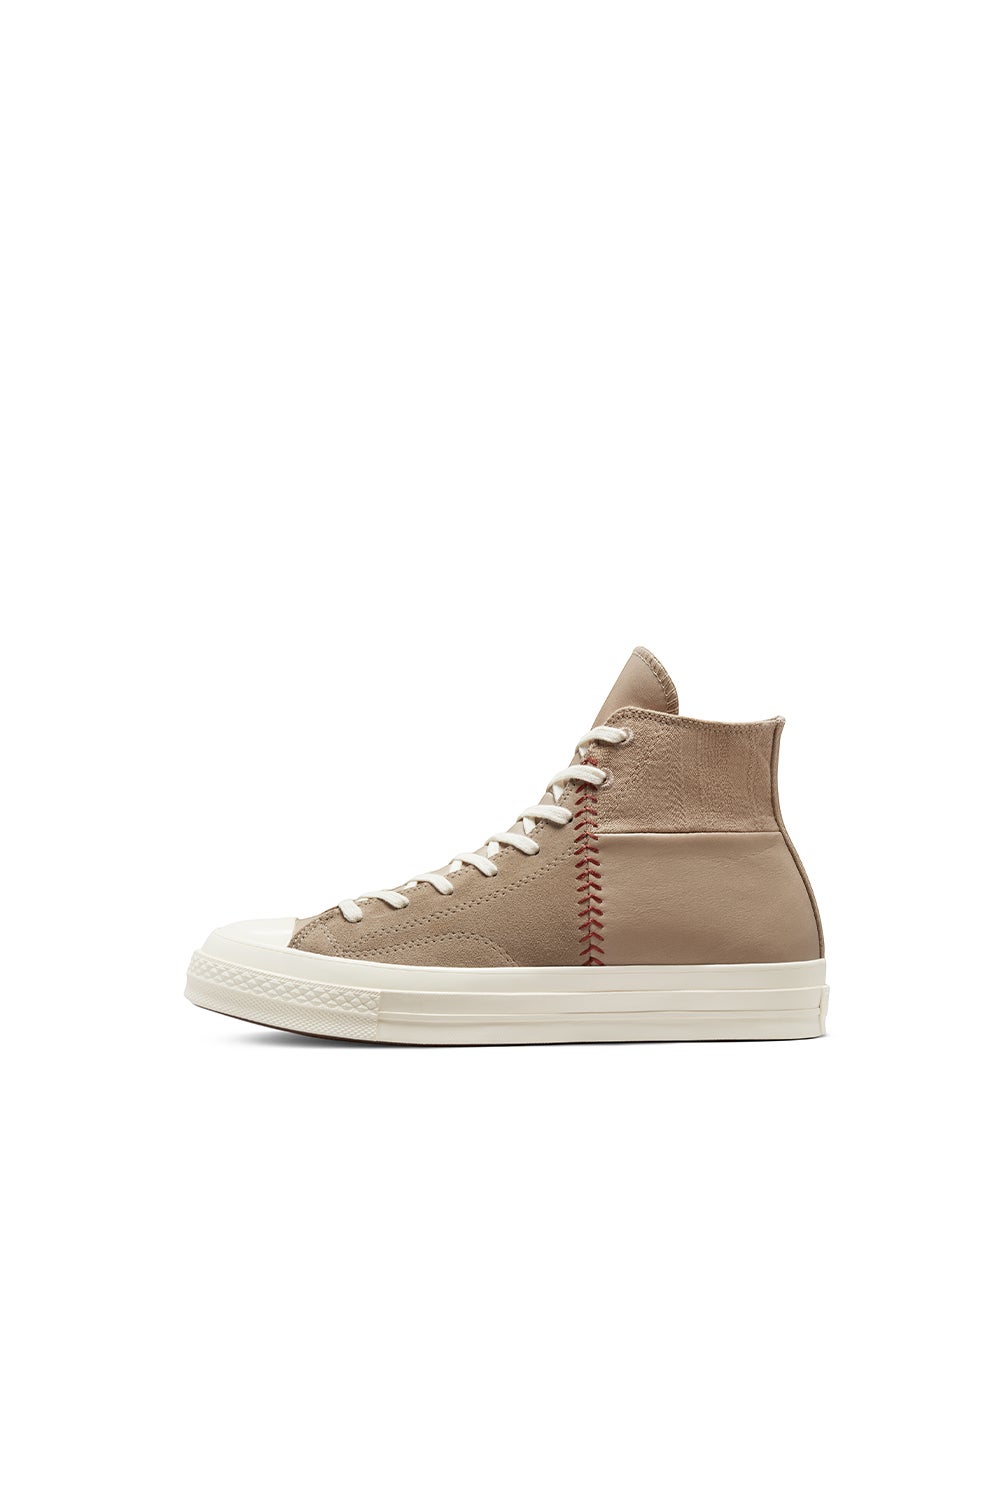 Converse Chuck 70 Crafted Split High Top Nomad Khaki